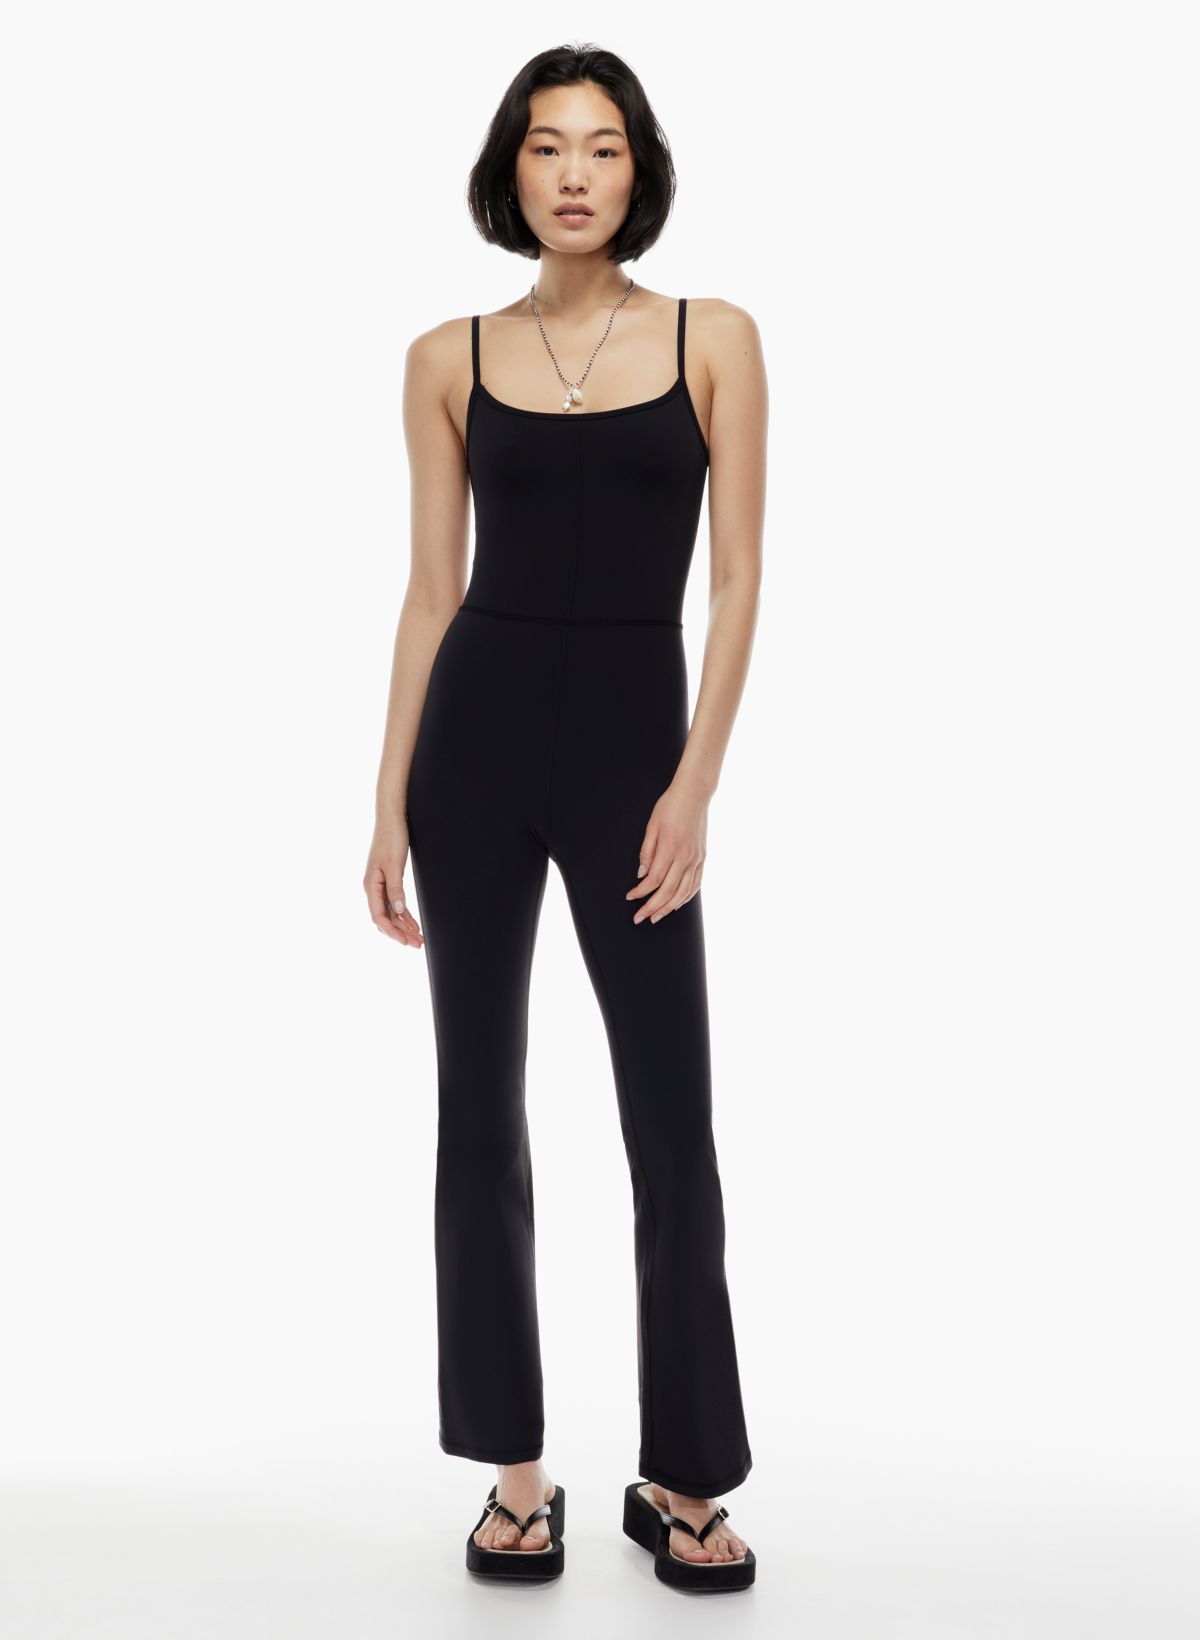 Call Me Tomorrow Ribbed Jumpsuit - Blue